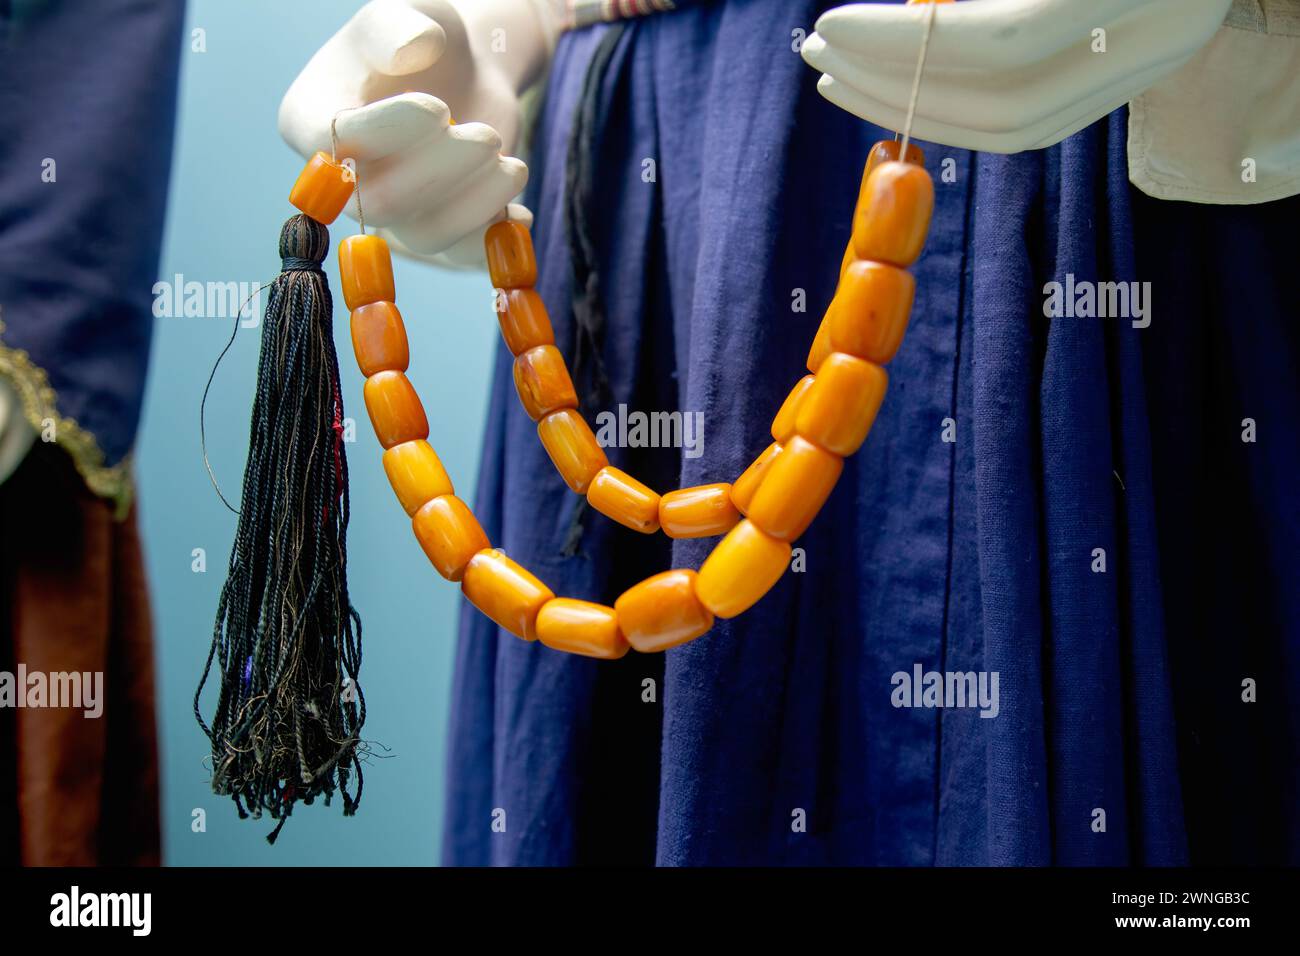 Worry beads (komboloi or kompoloi), a string of beads manipulated with one or two hands and used to pass time in Greek and Cypriot culture. Stock Photo